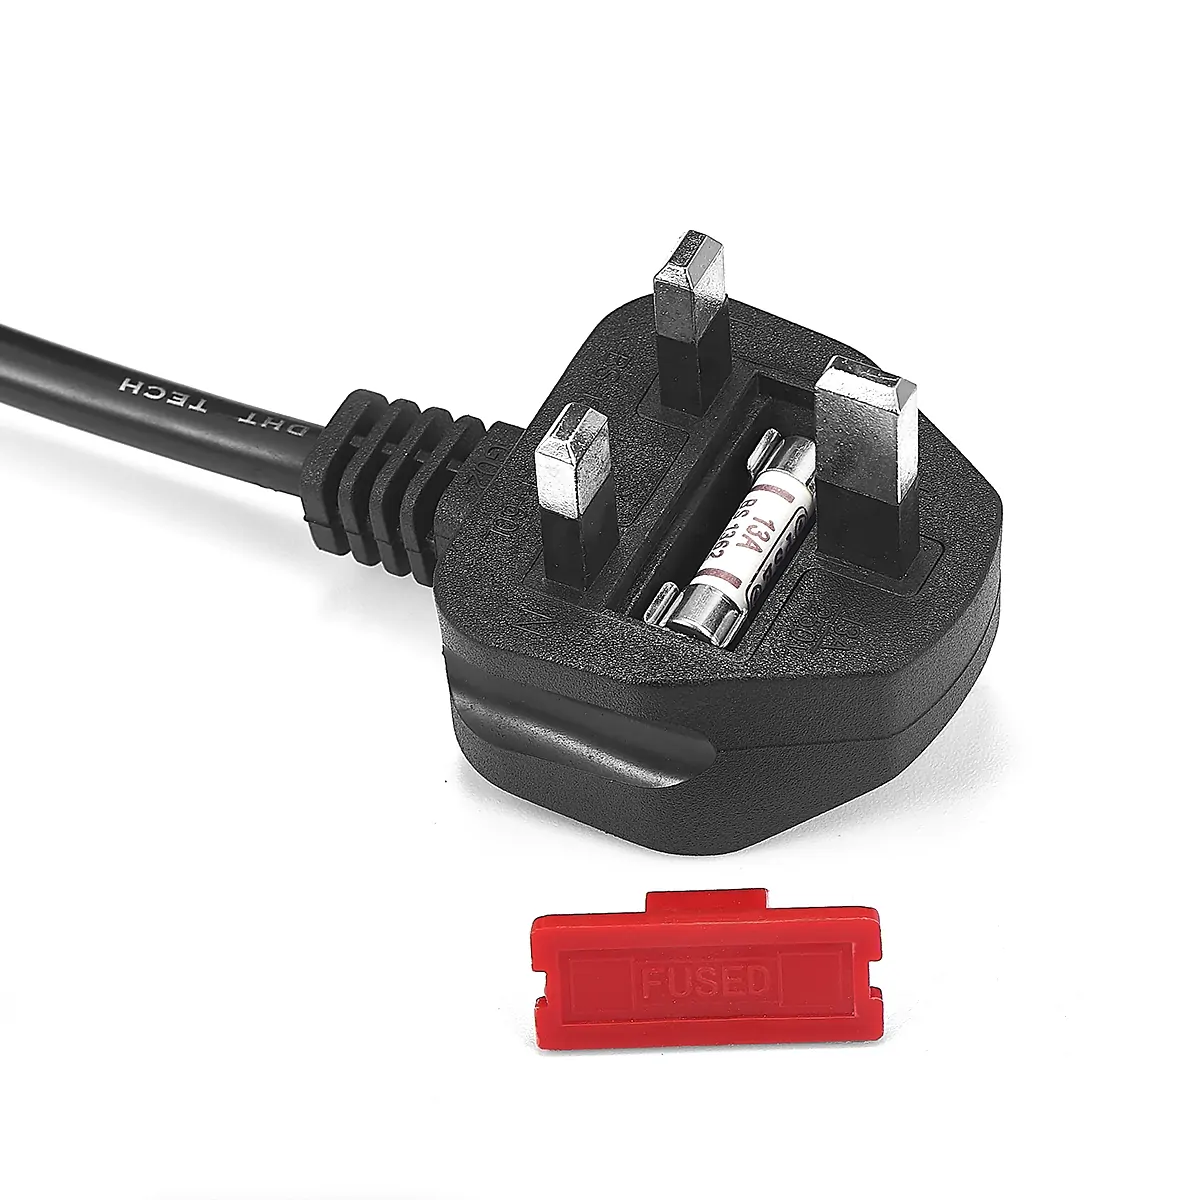 1.5m UK AC power cord with fuse